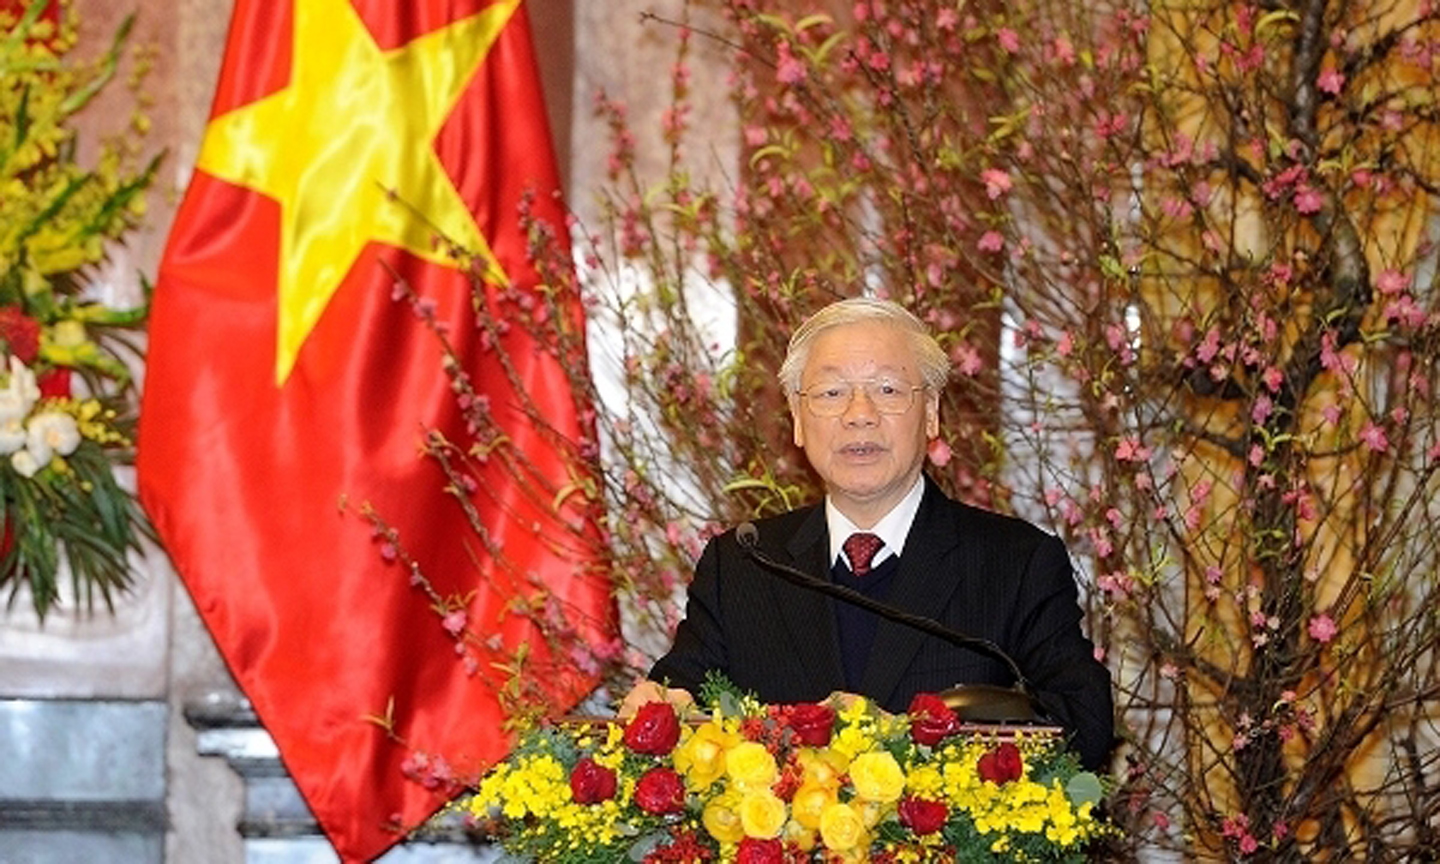 Party General Secretary and President Nguyen Phu Trong offers Tet greetings at the get-together in Hanoi on February 22 (Photo: NDO/Dang Khoa) 